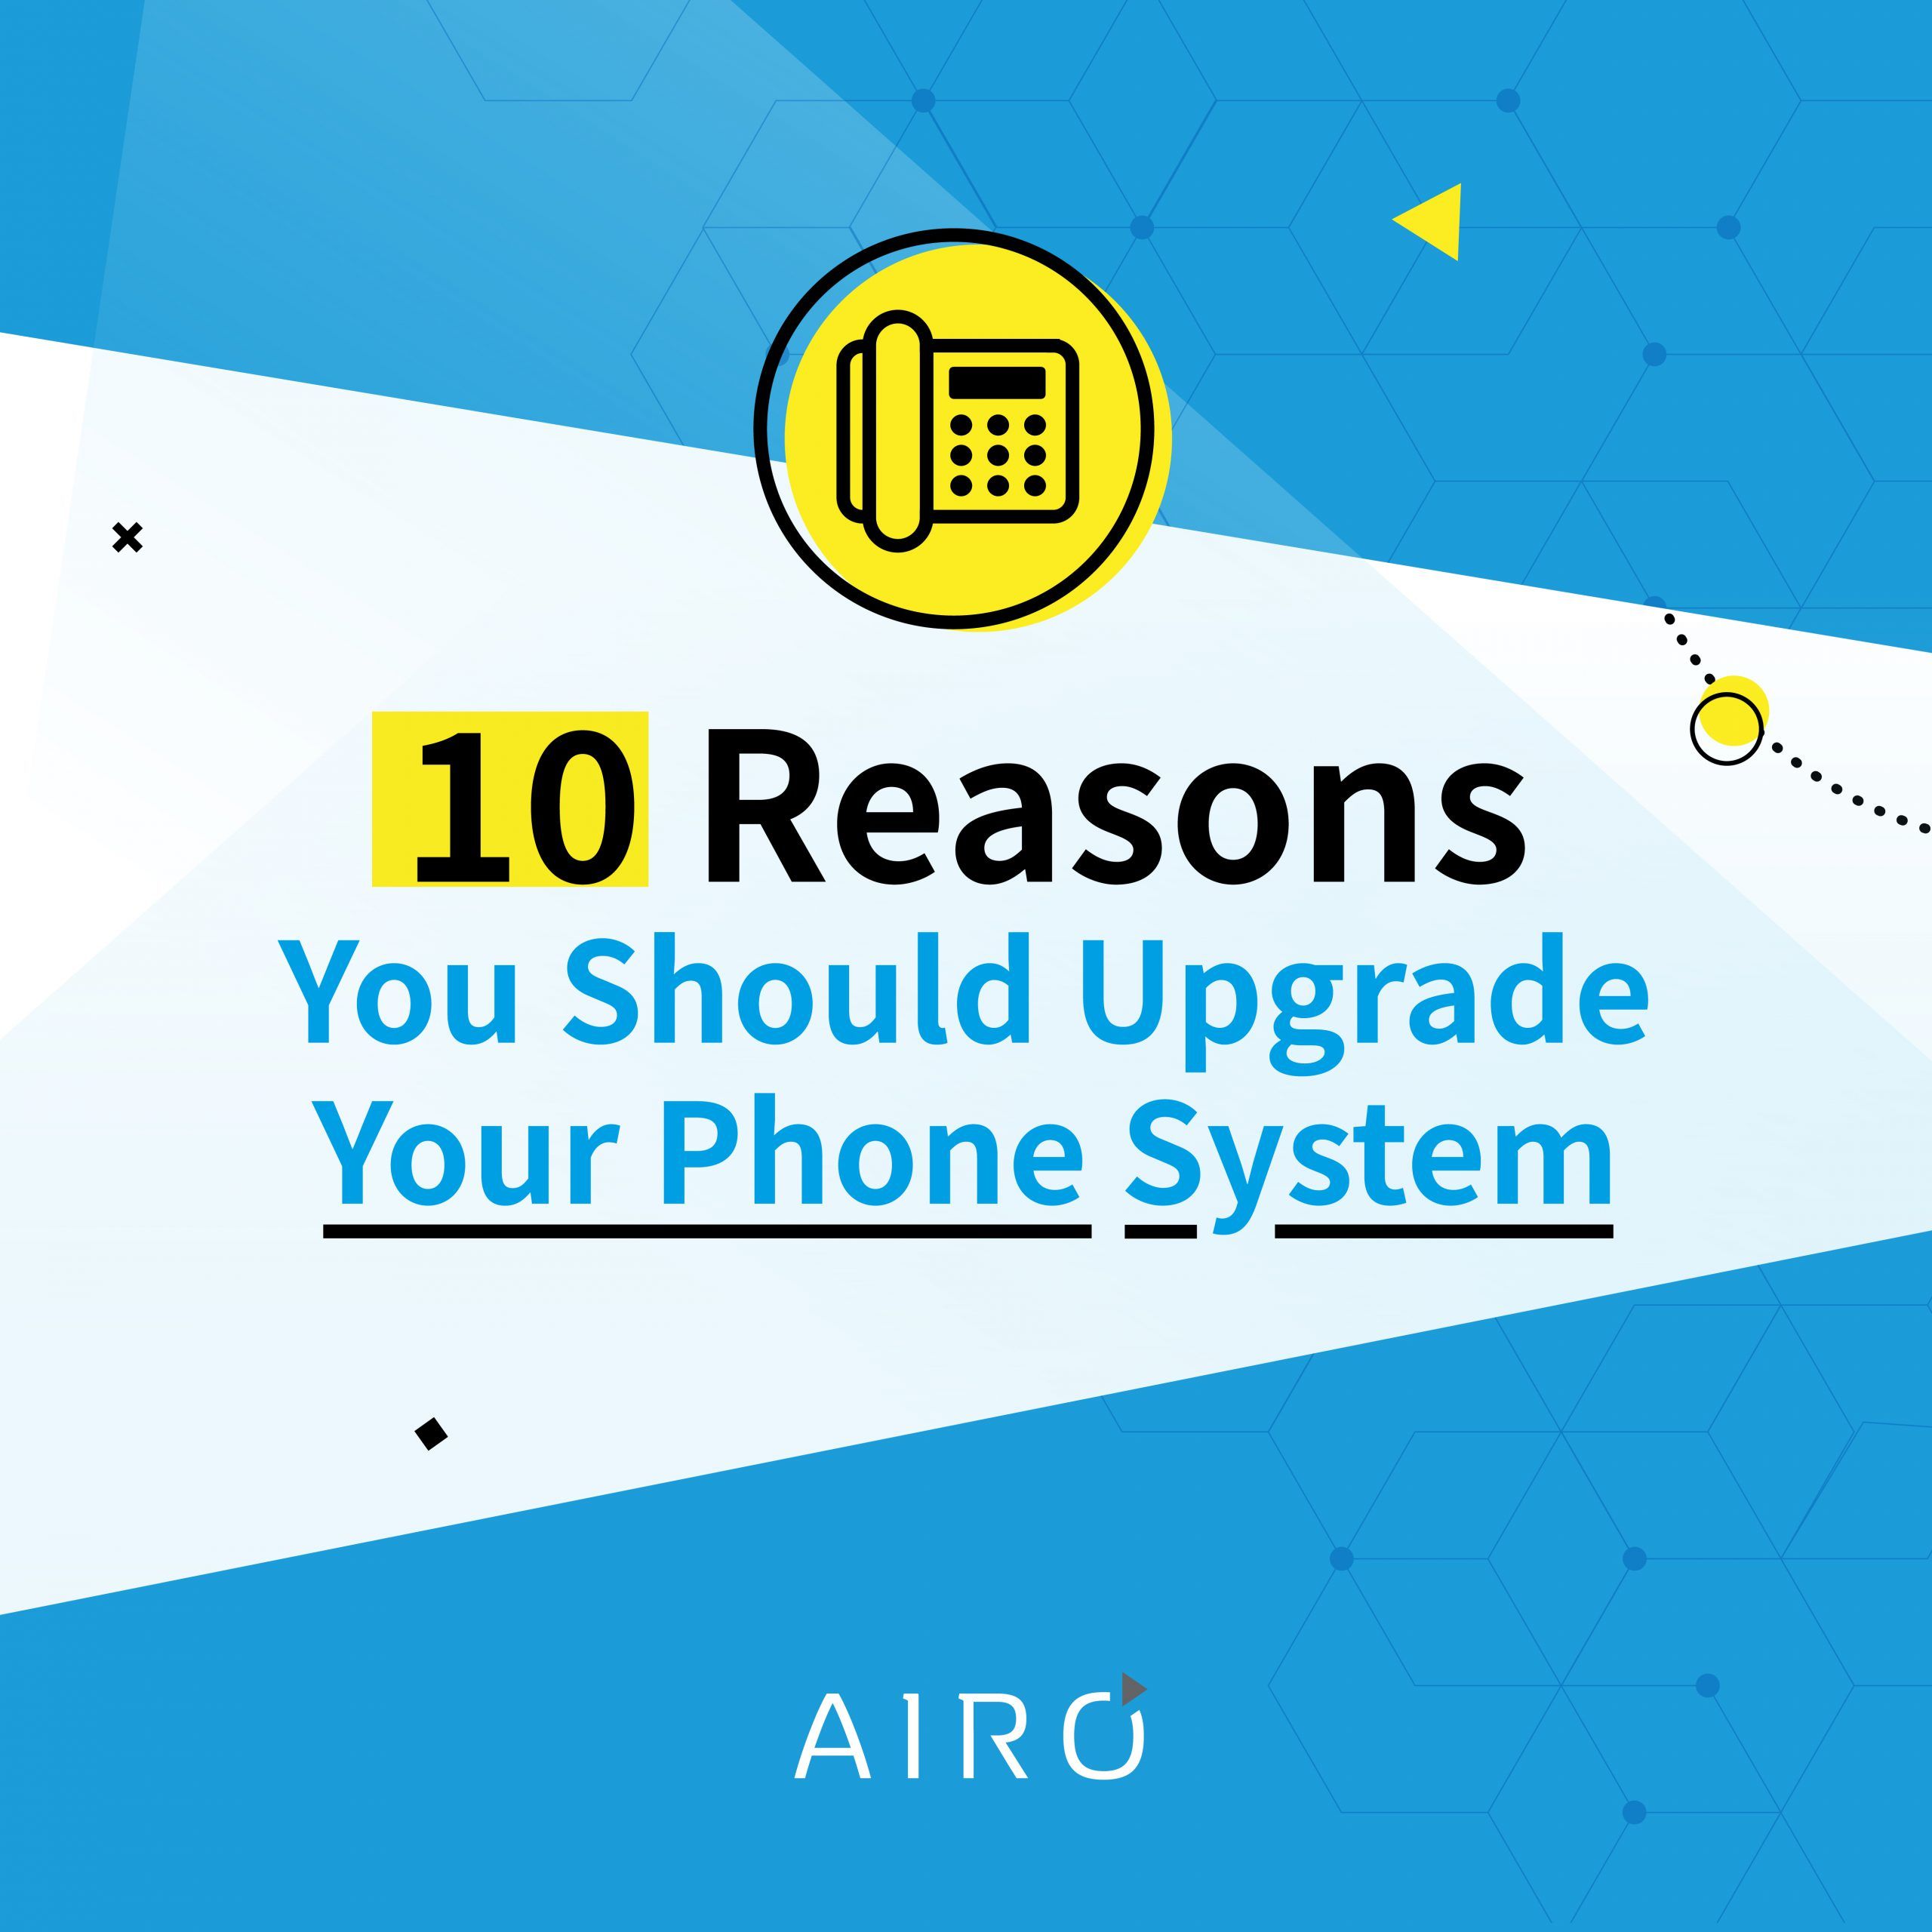 Ten Reasons You Should Upgrade Your Phone System